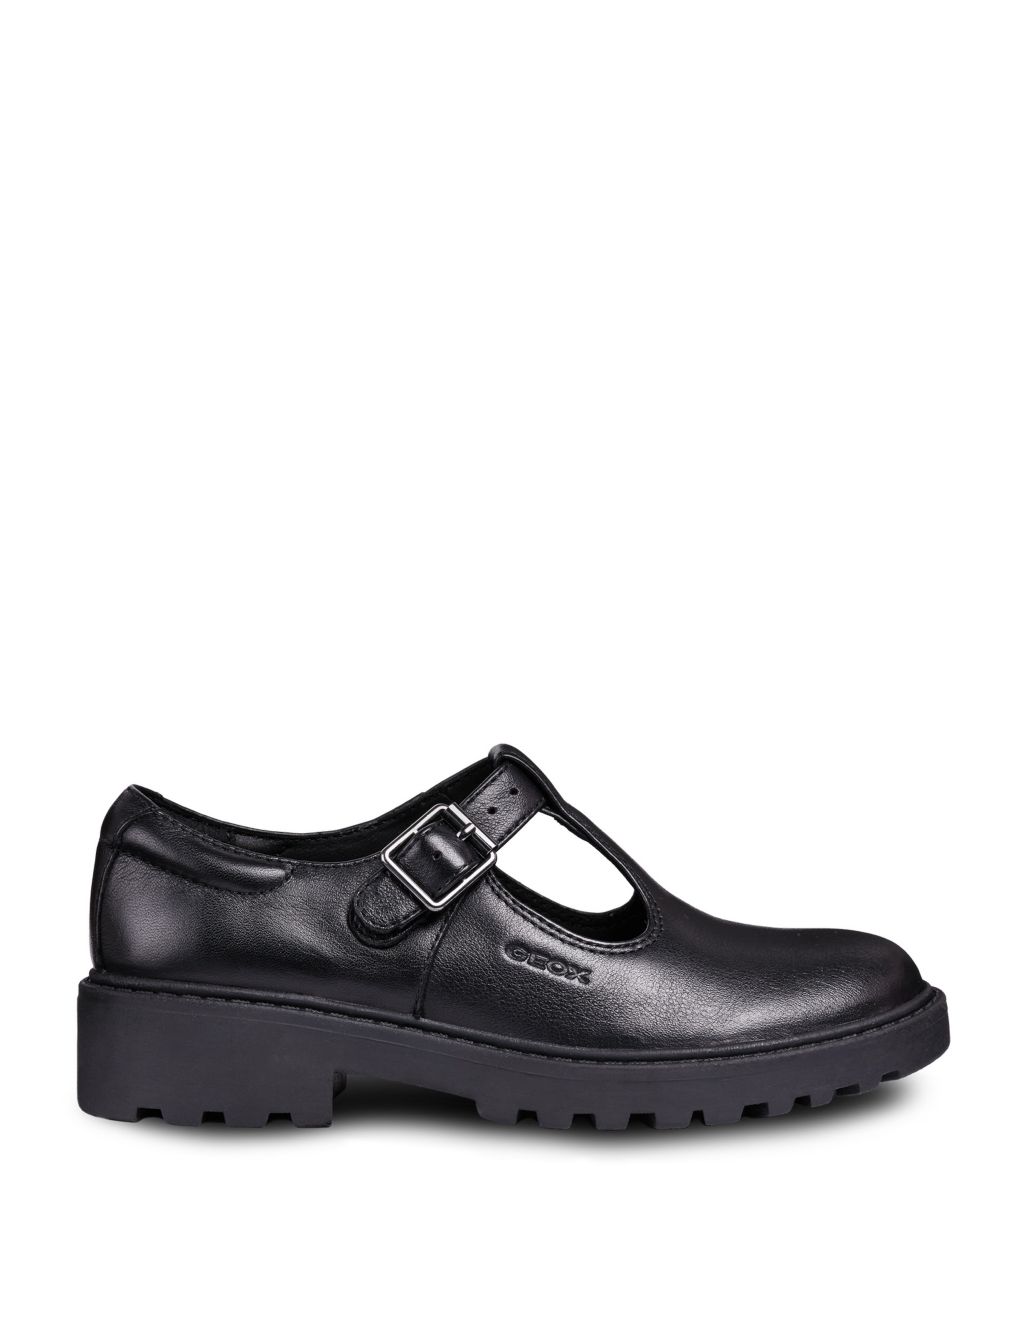 Kids' Patent Leather T-Bar School Shoes (13 Small - 6 Large) | Geox | M&S